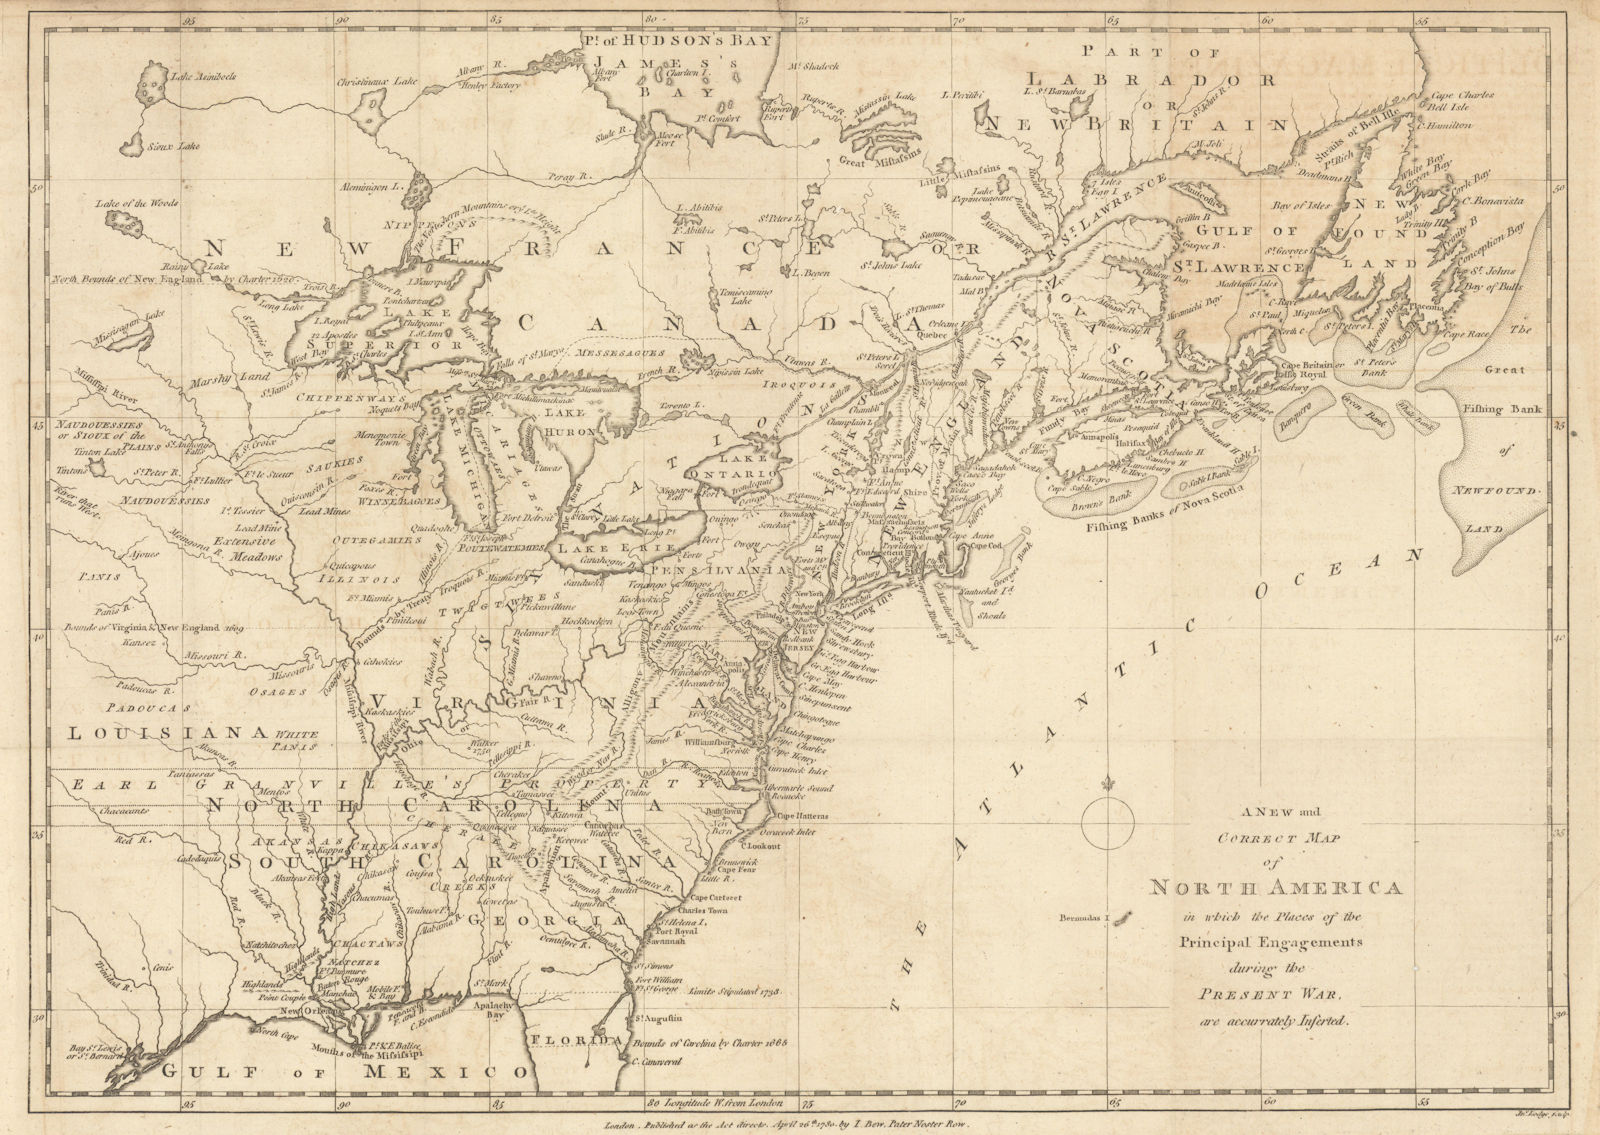 A New & Correct Map of North America in which the places… JOHN LODGE 1780